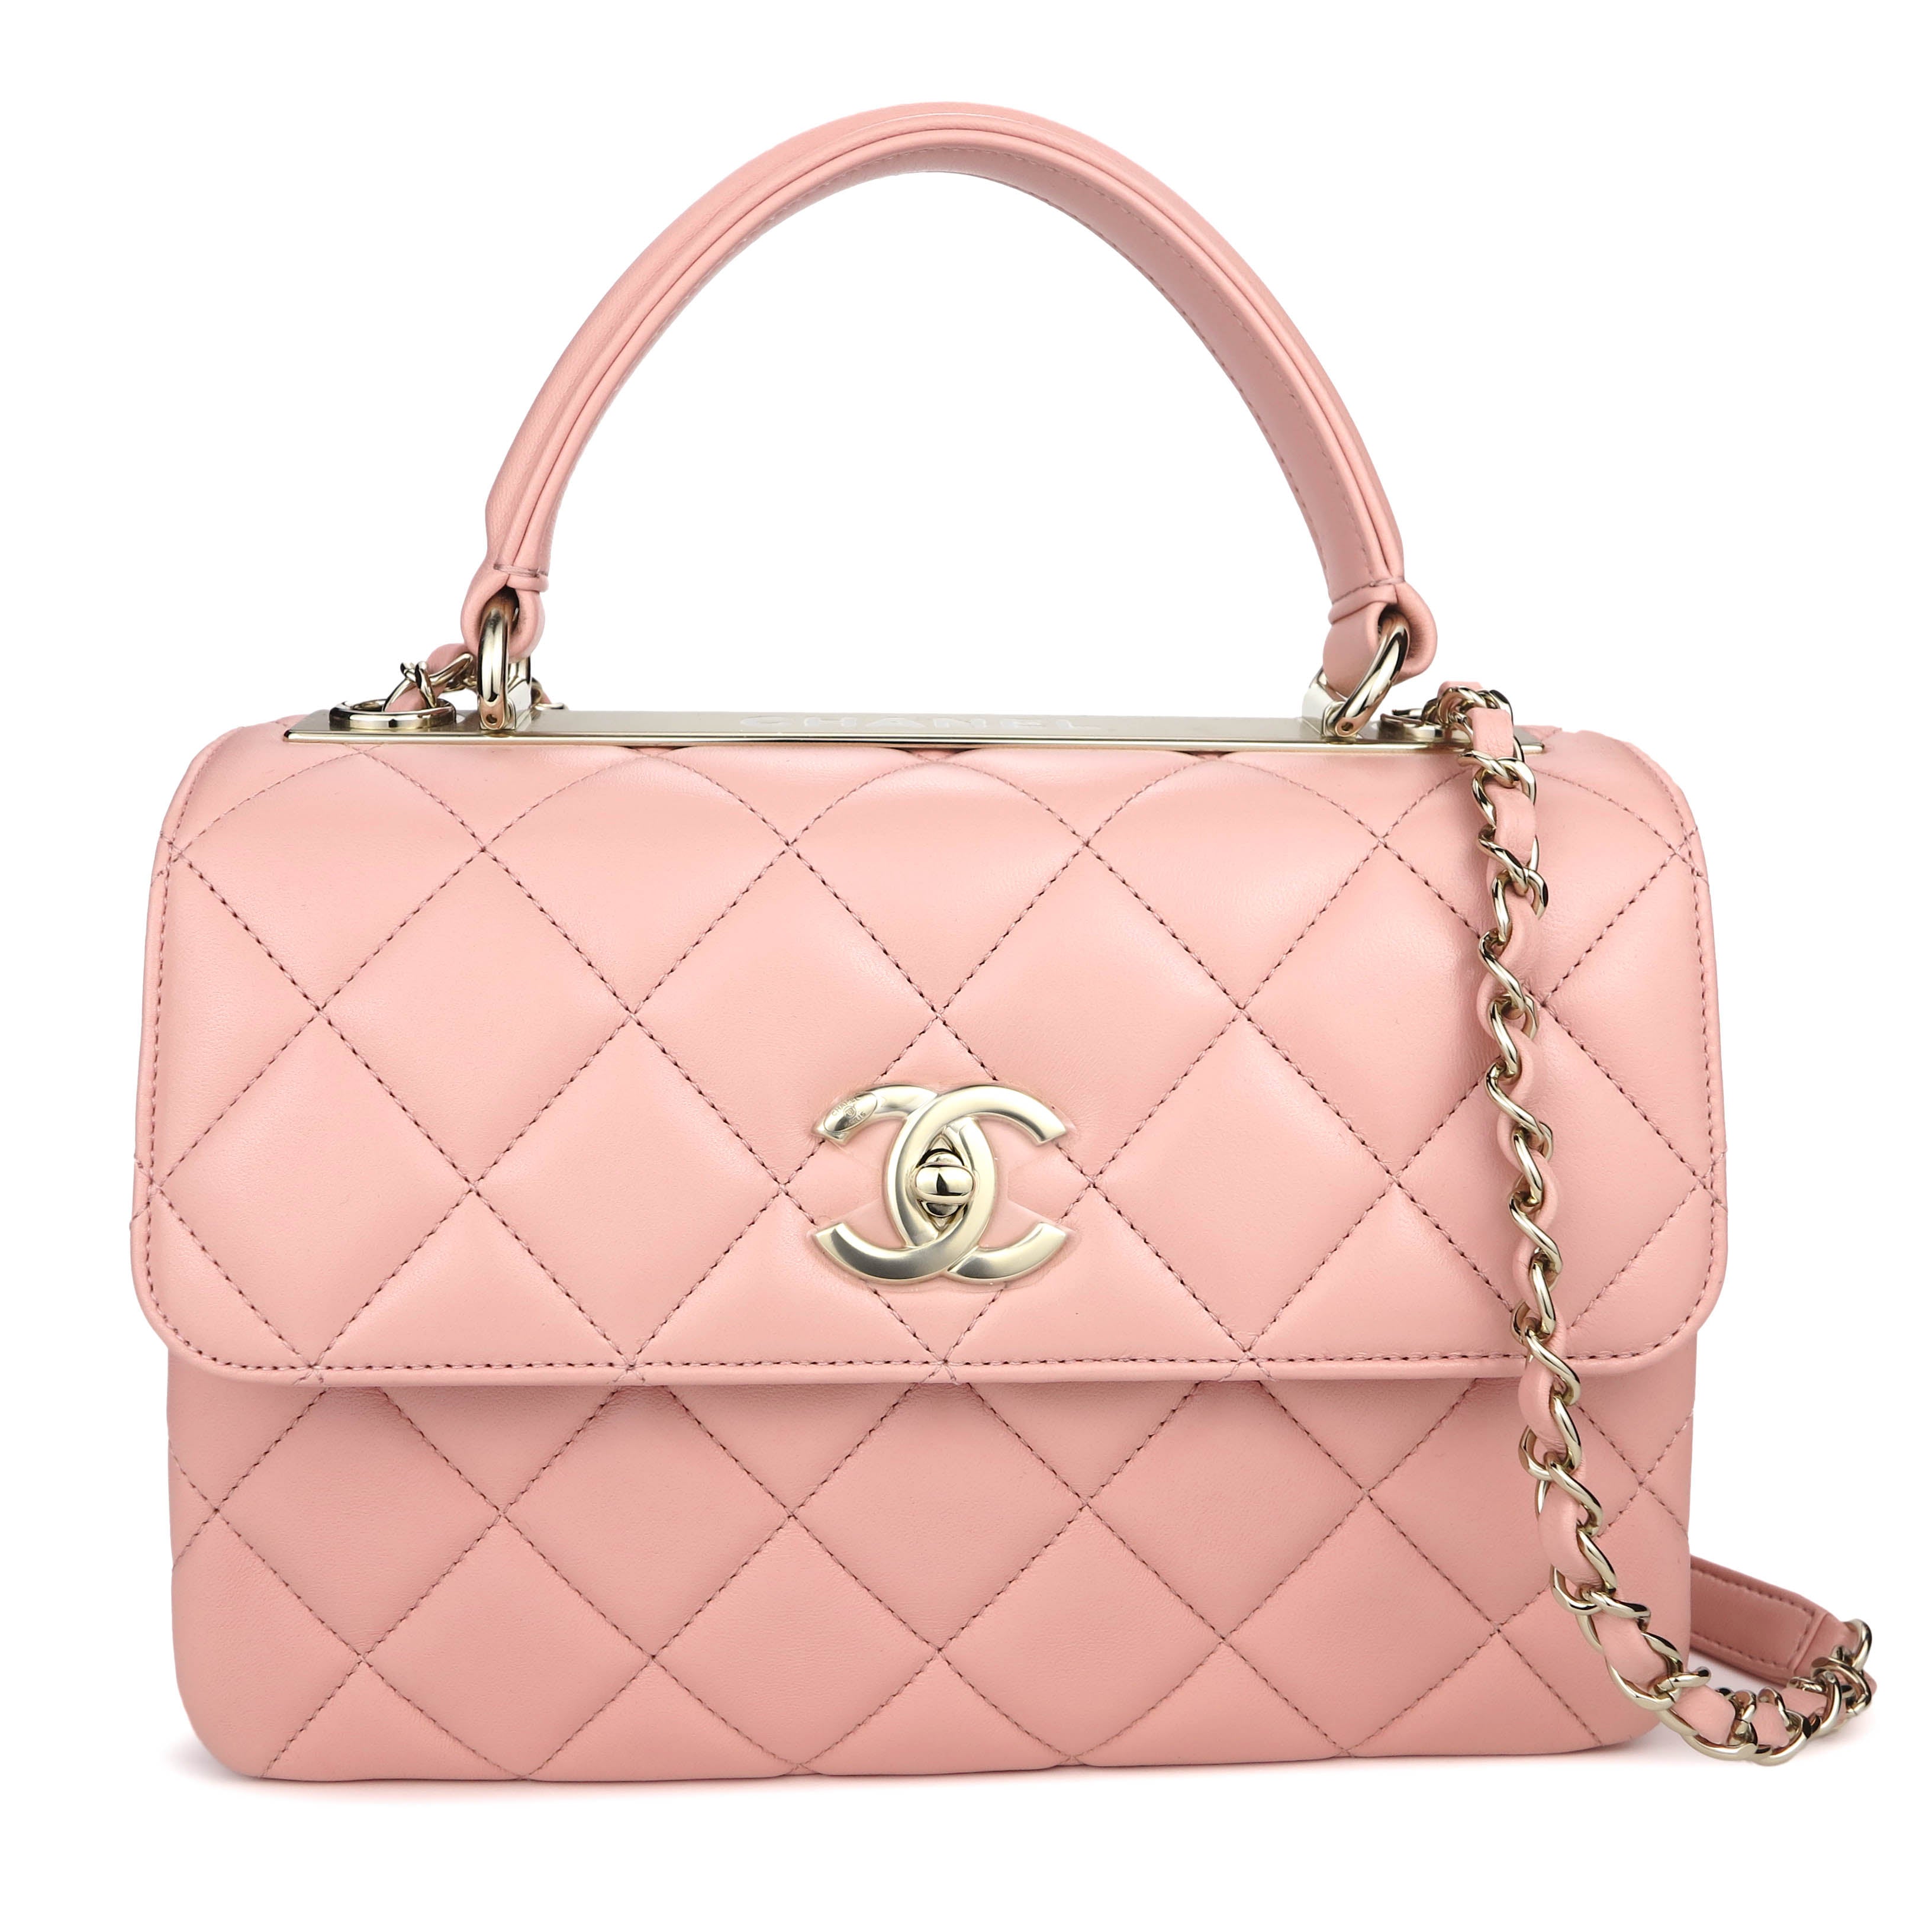 chanel bag pink small new